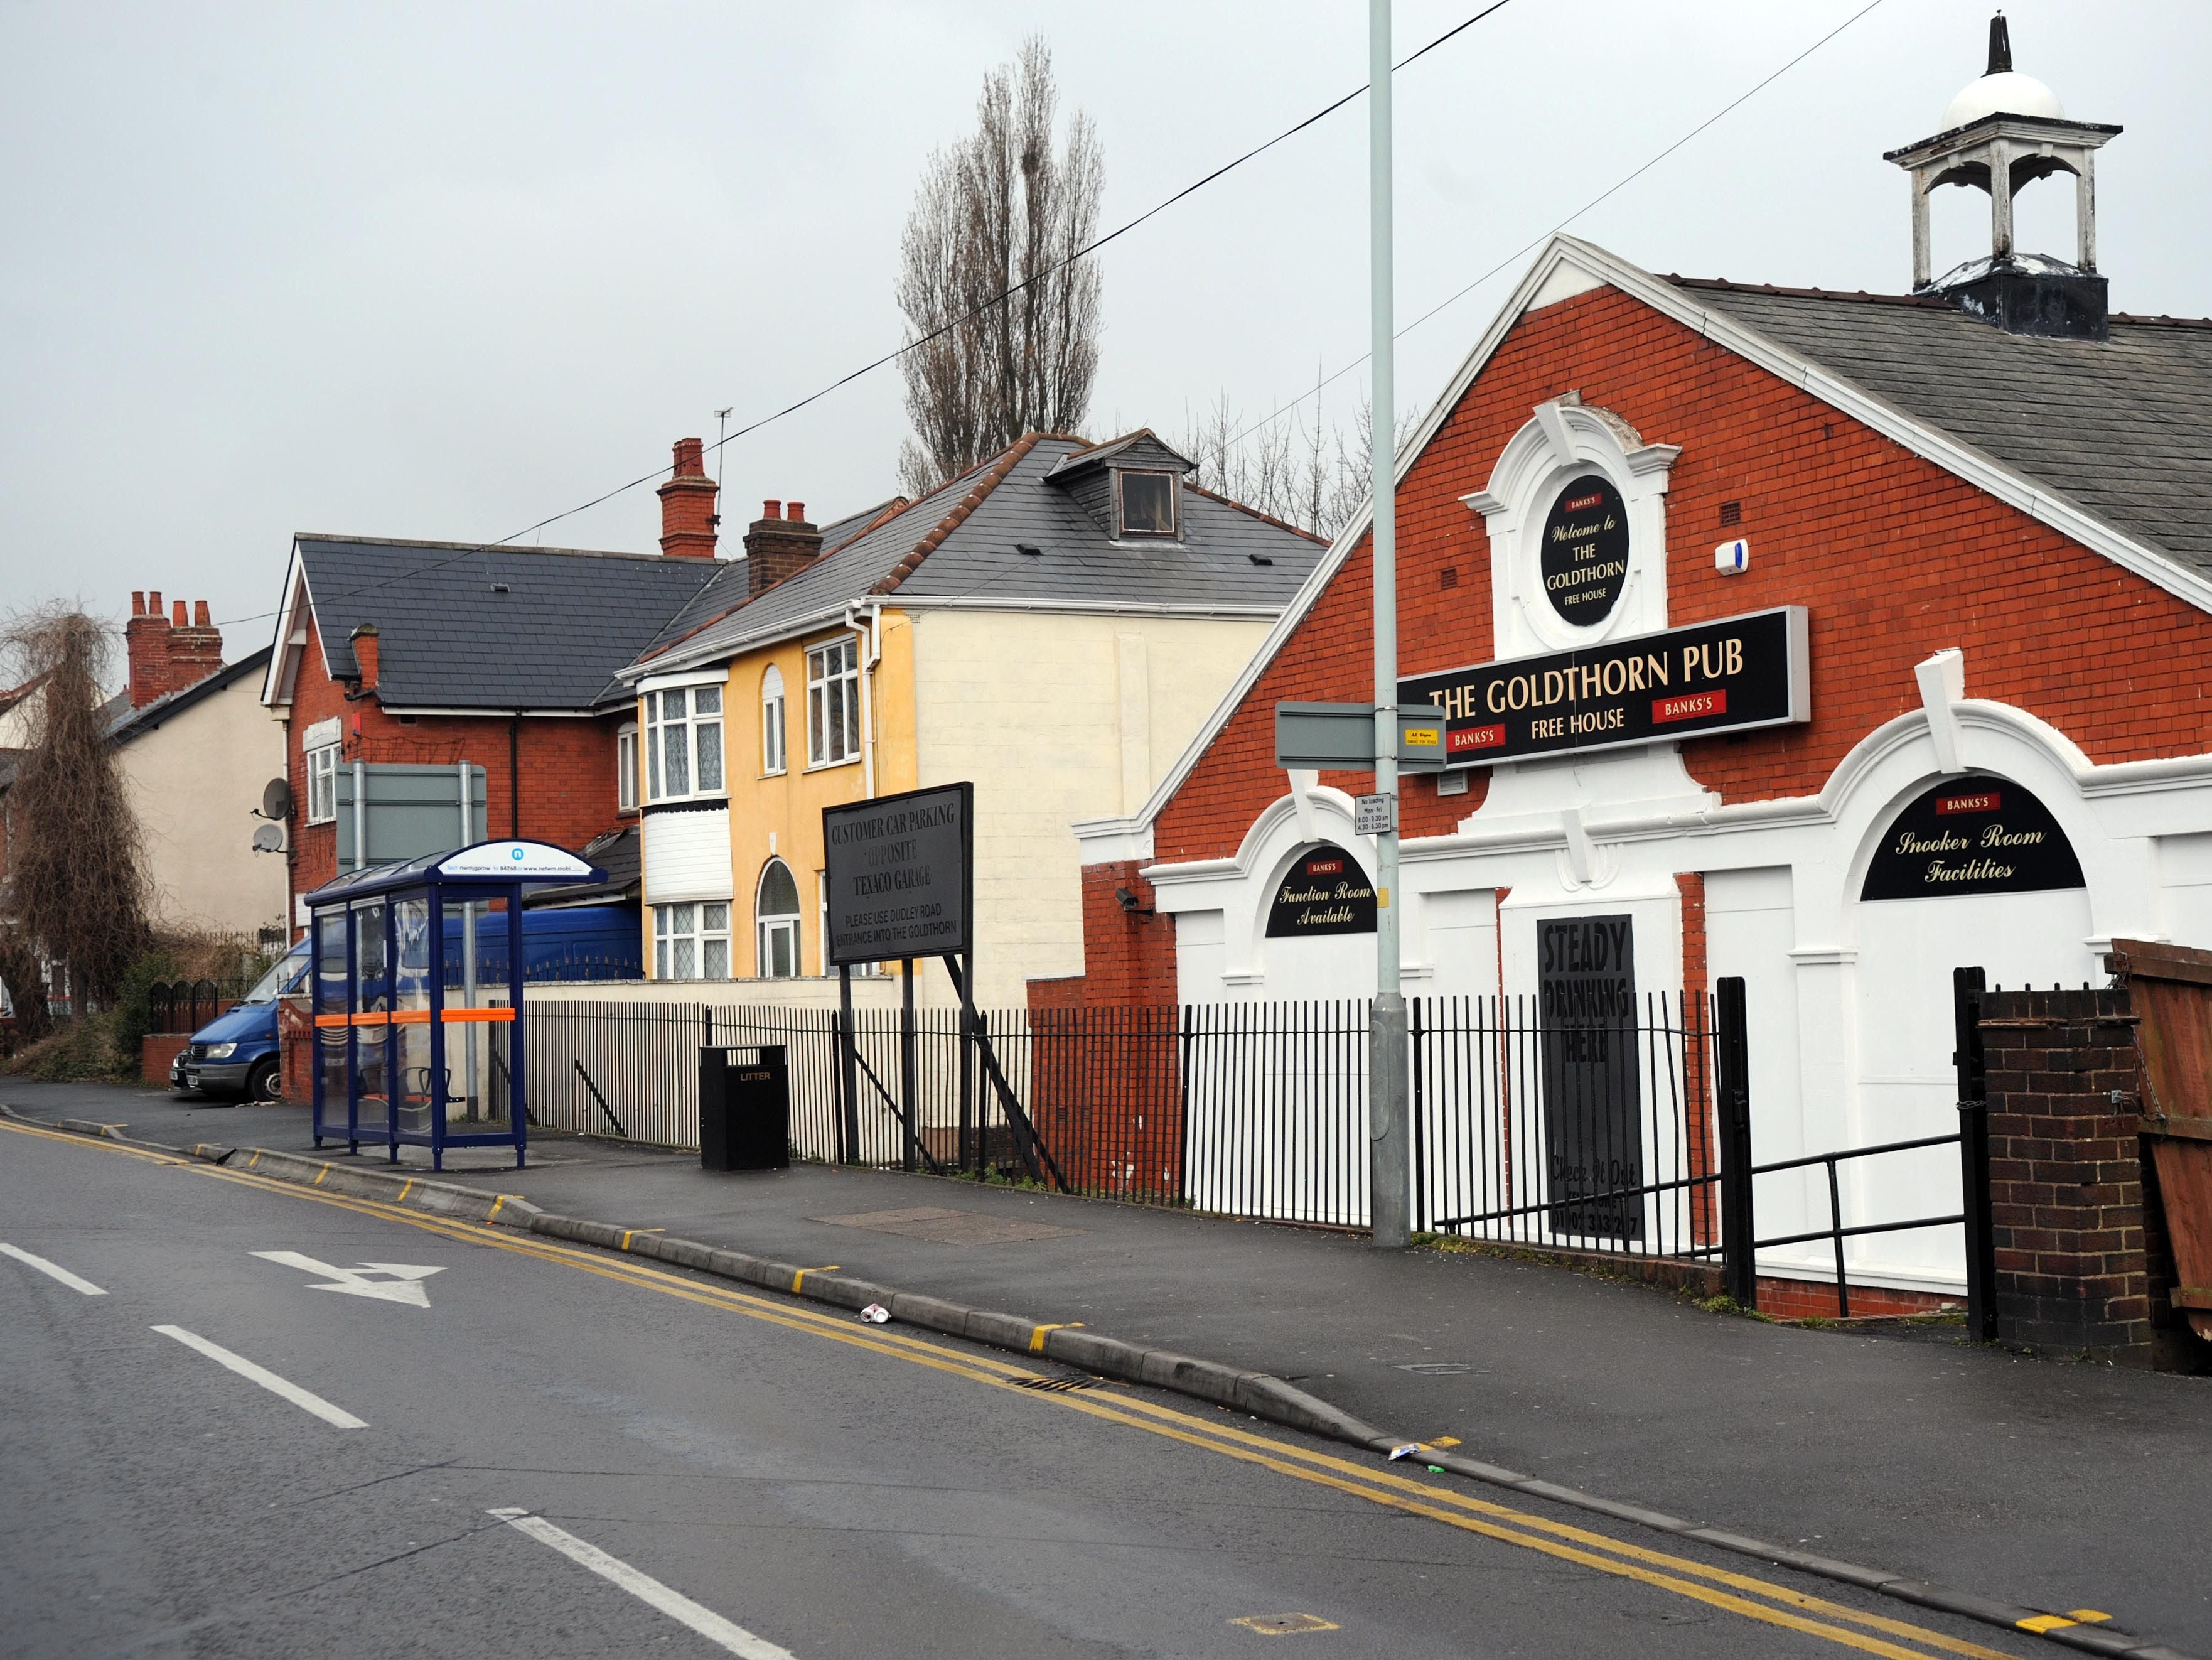 Alterations to Wolverhampton pub made without permission set to be considered